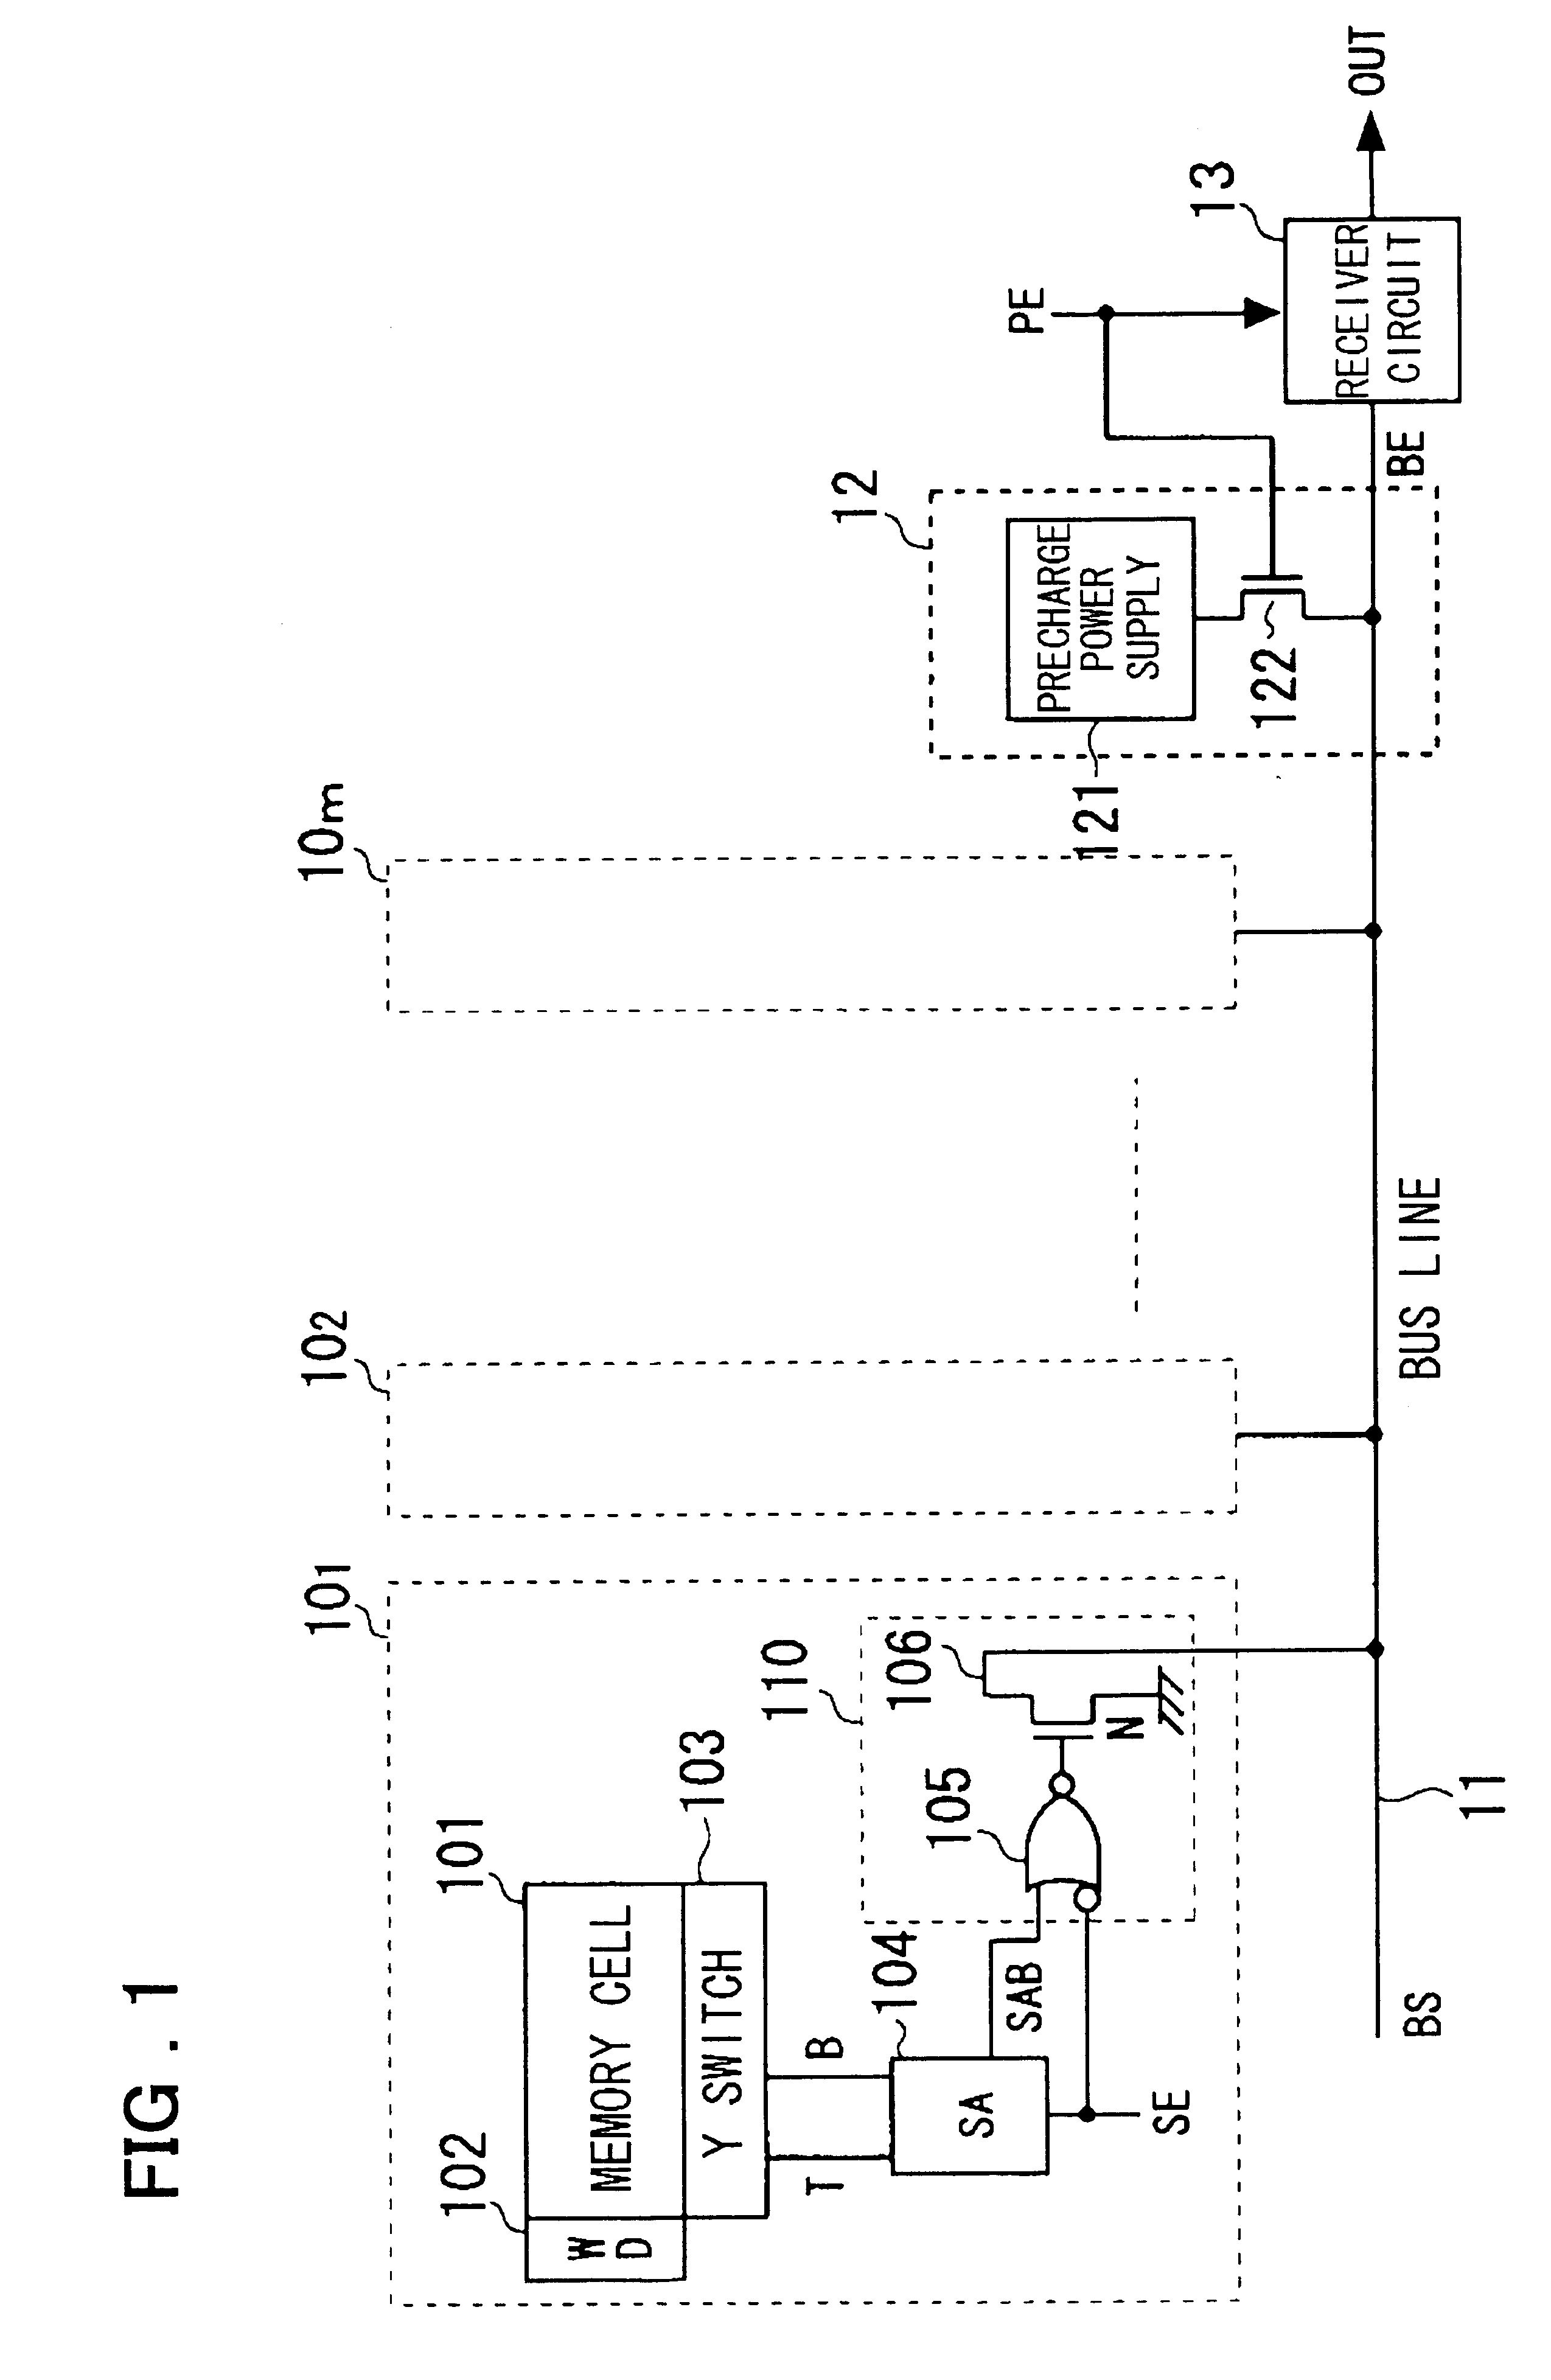 Bus interface circuit and receiver circuit